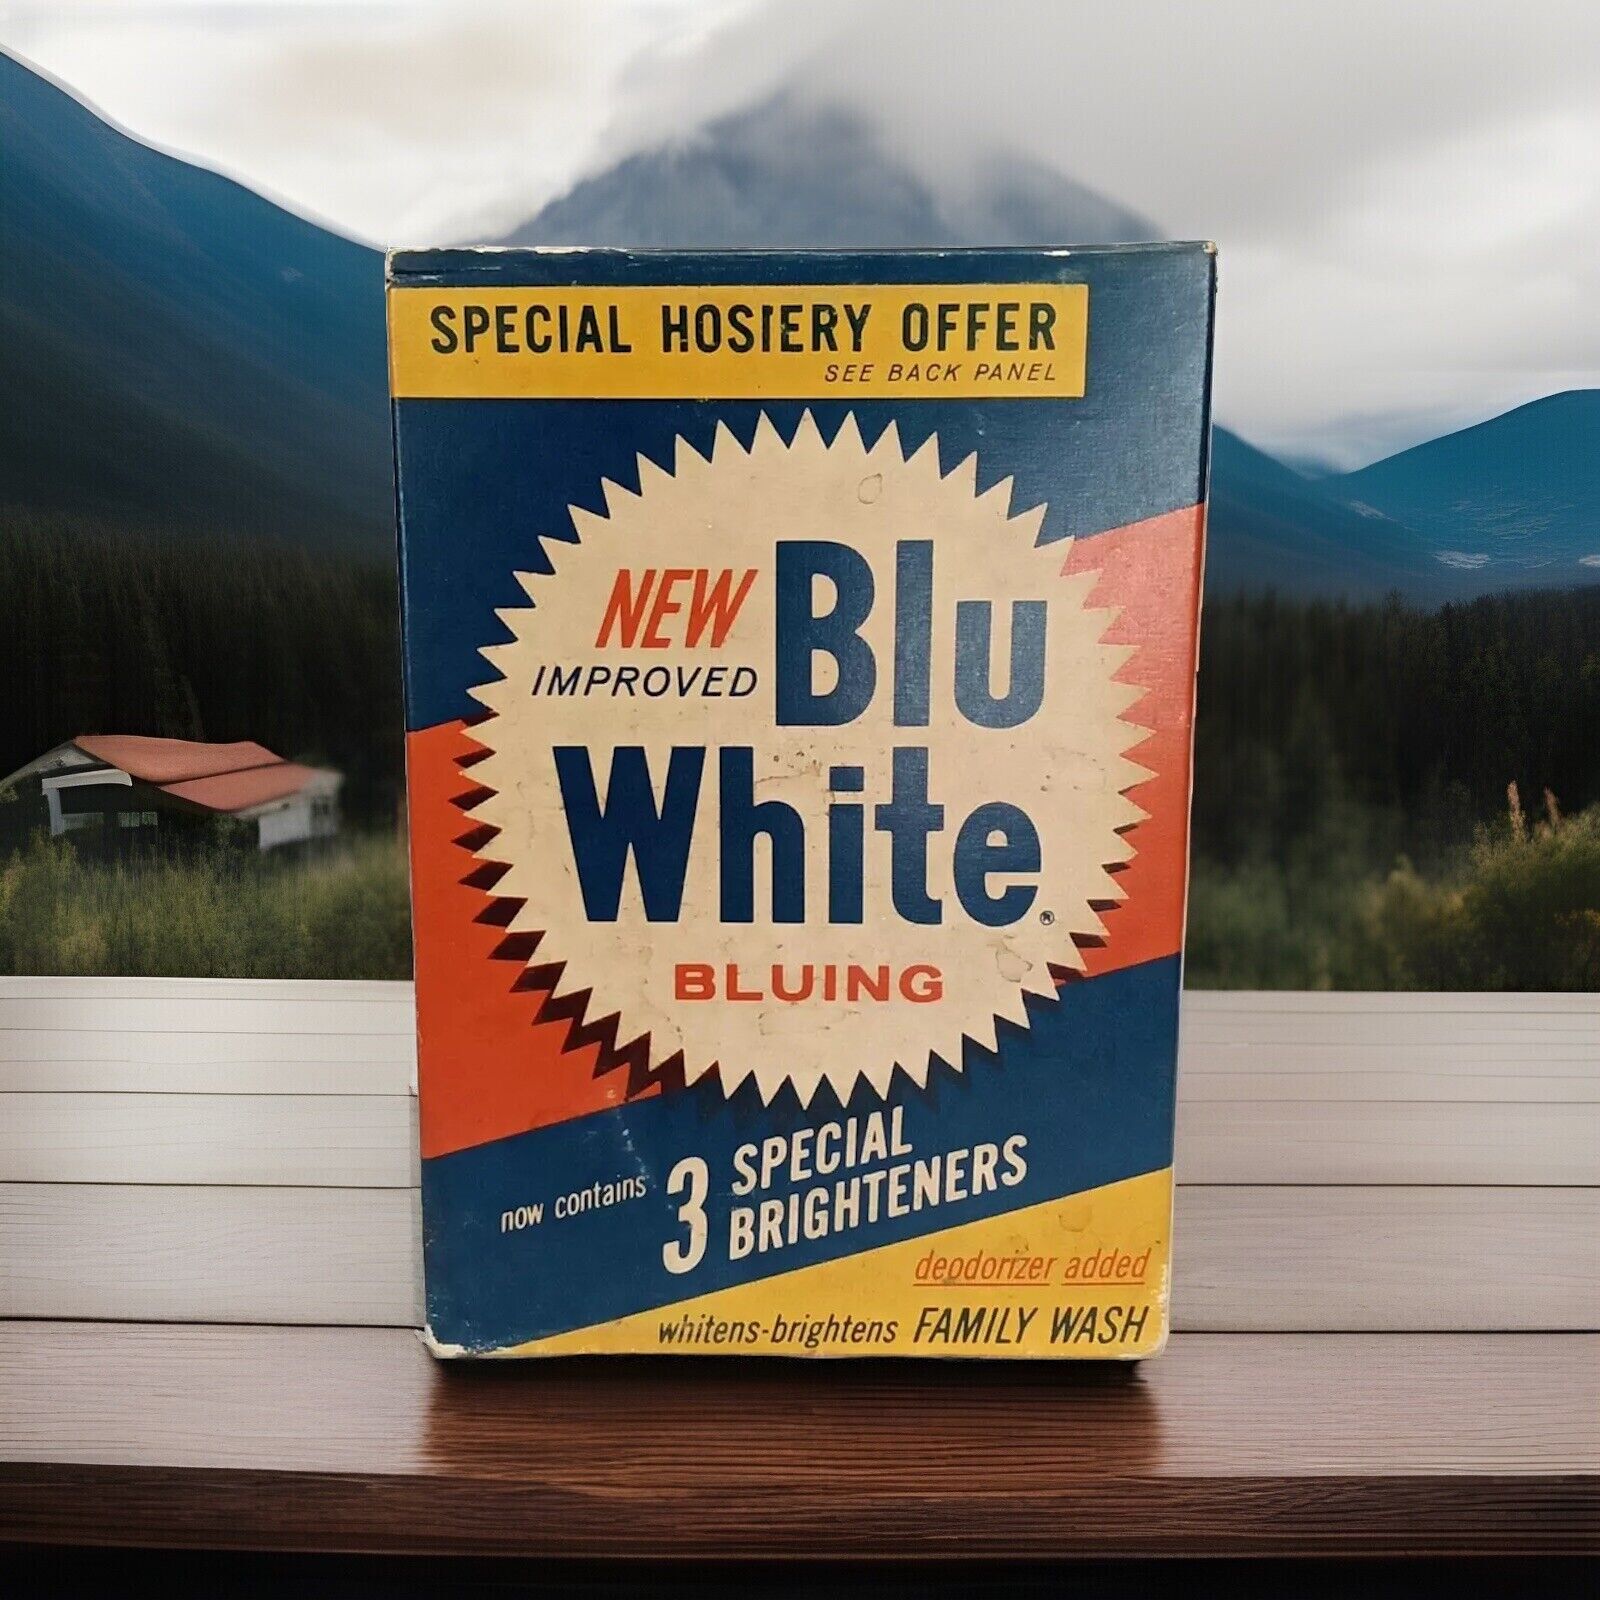 Purex Laundry Detergent Blue White Bluing Sealed 1930s Old Stock Advertisement